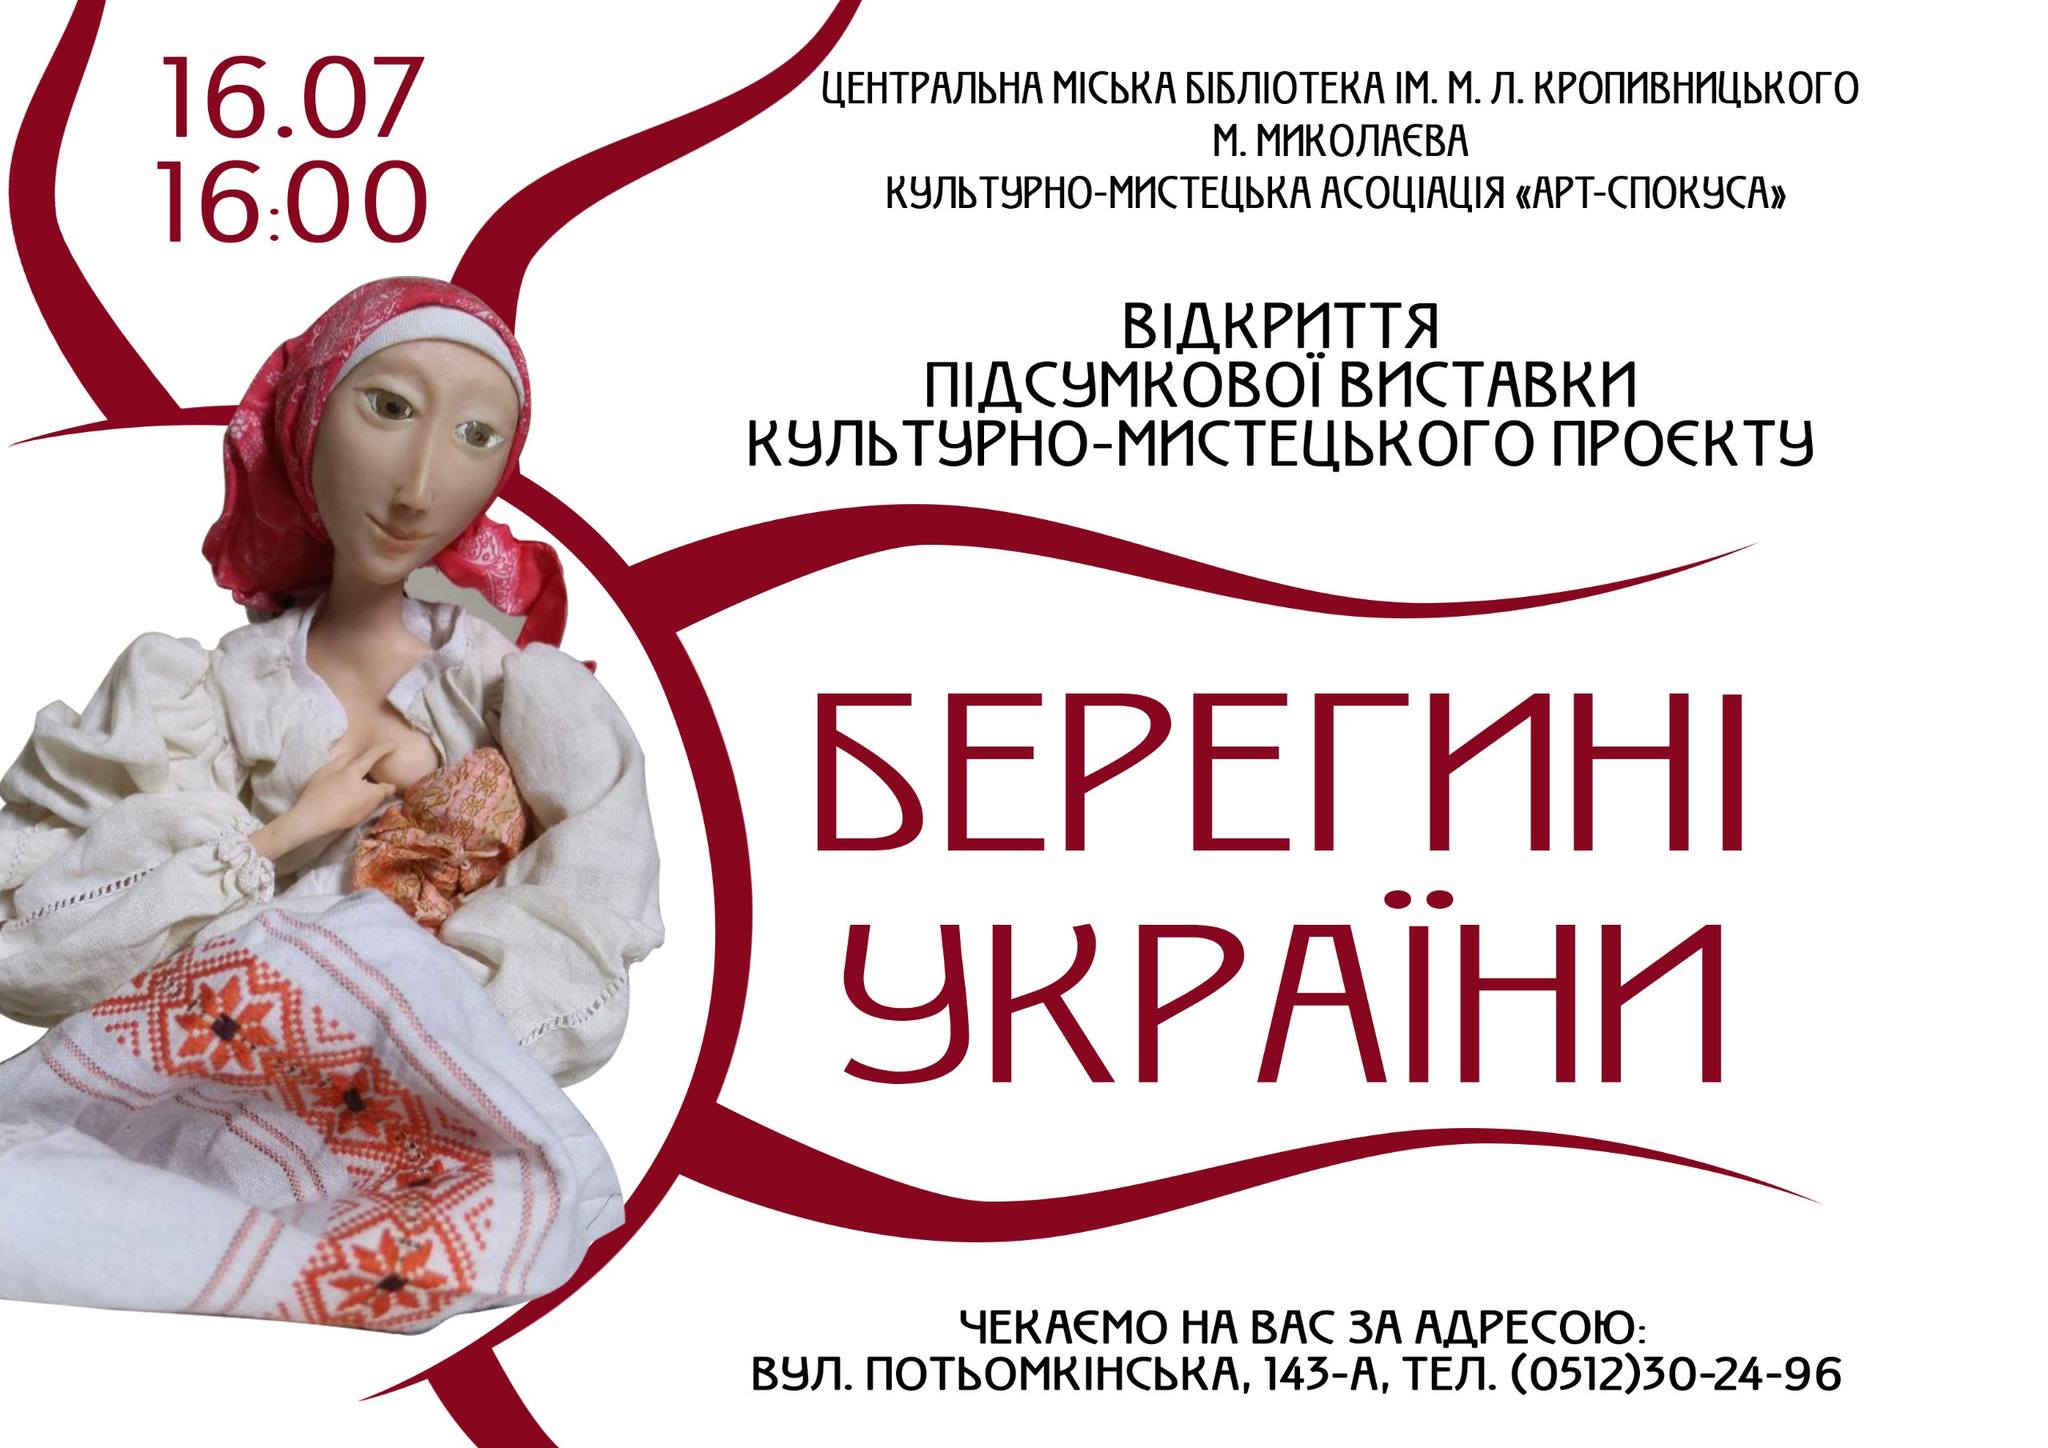 final exhibition of the cultural and artistic project "Berehynias of Ukraine"